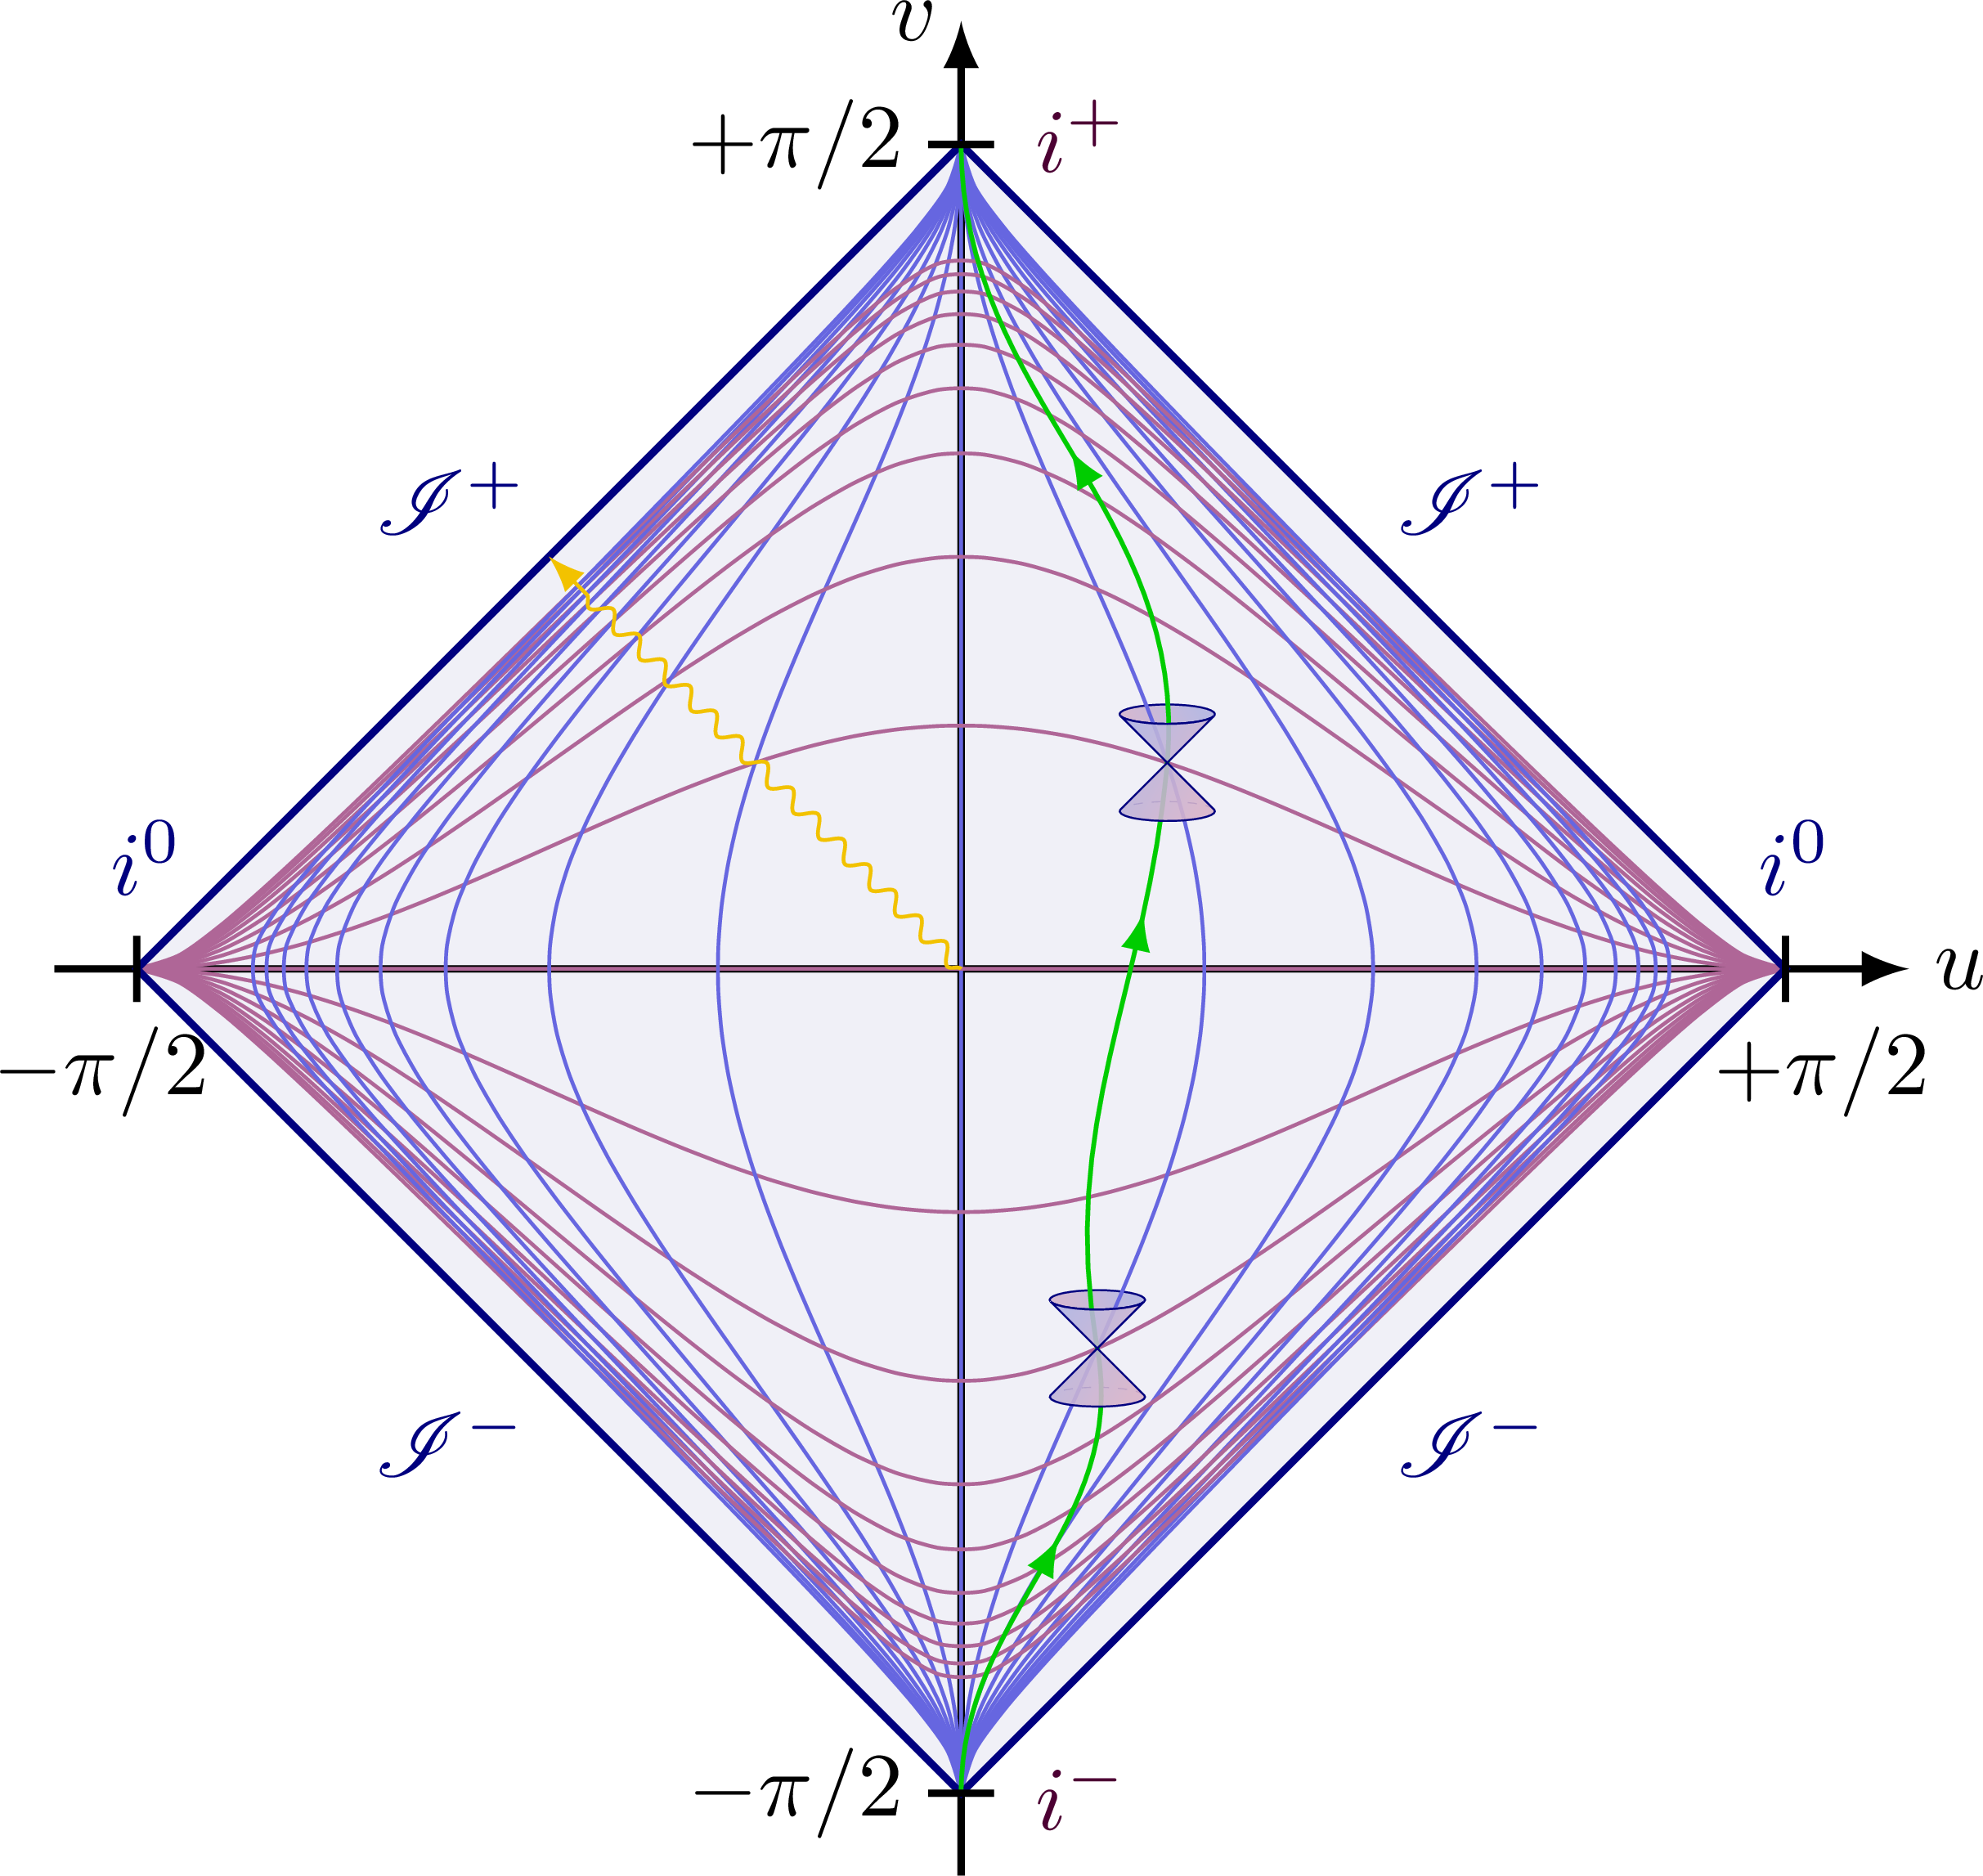 Penrose diagram for Minkowski spacetime with light cones.